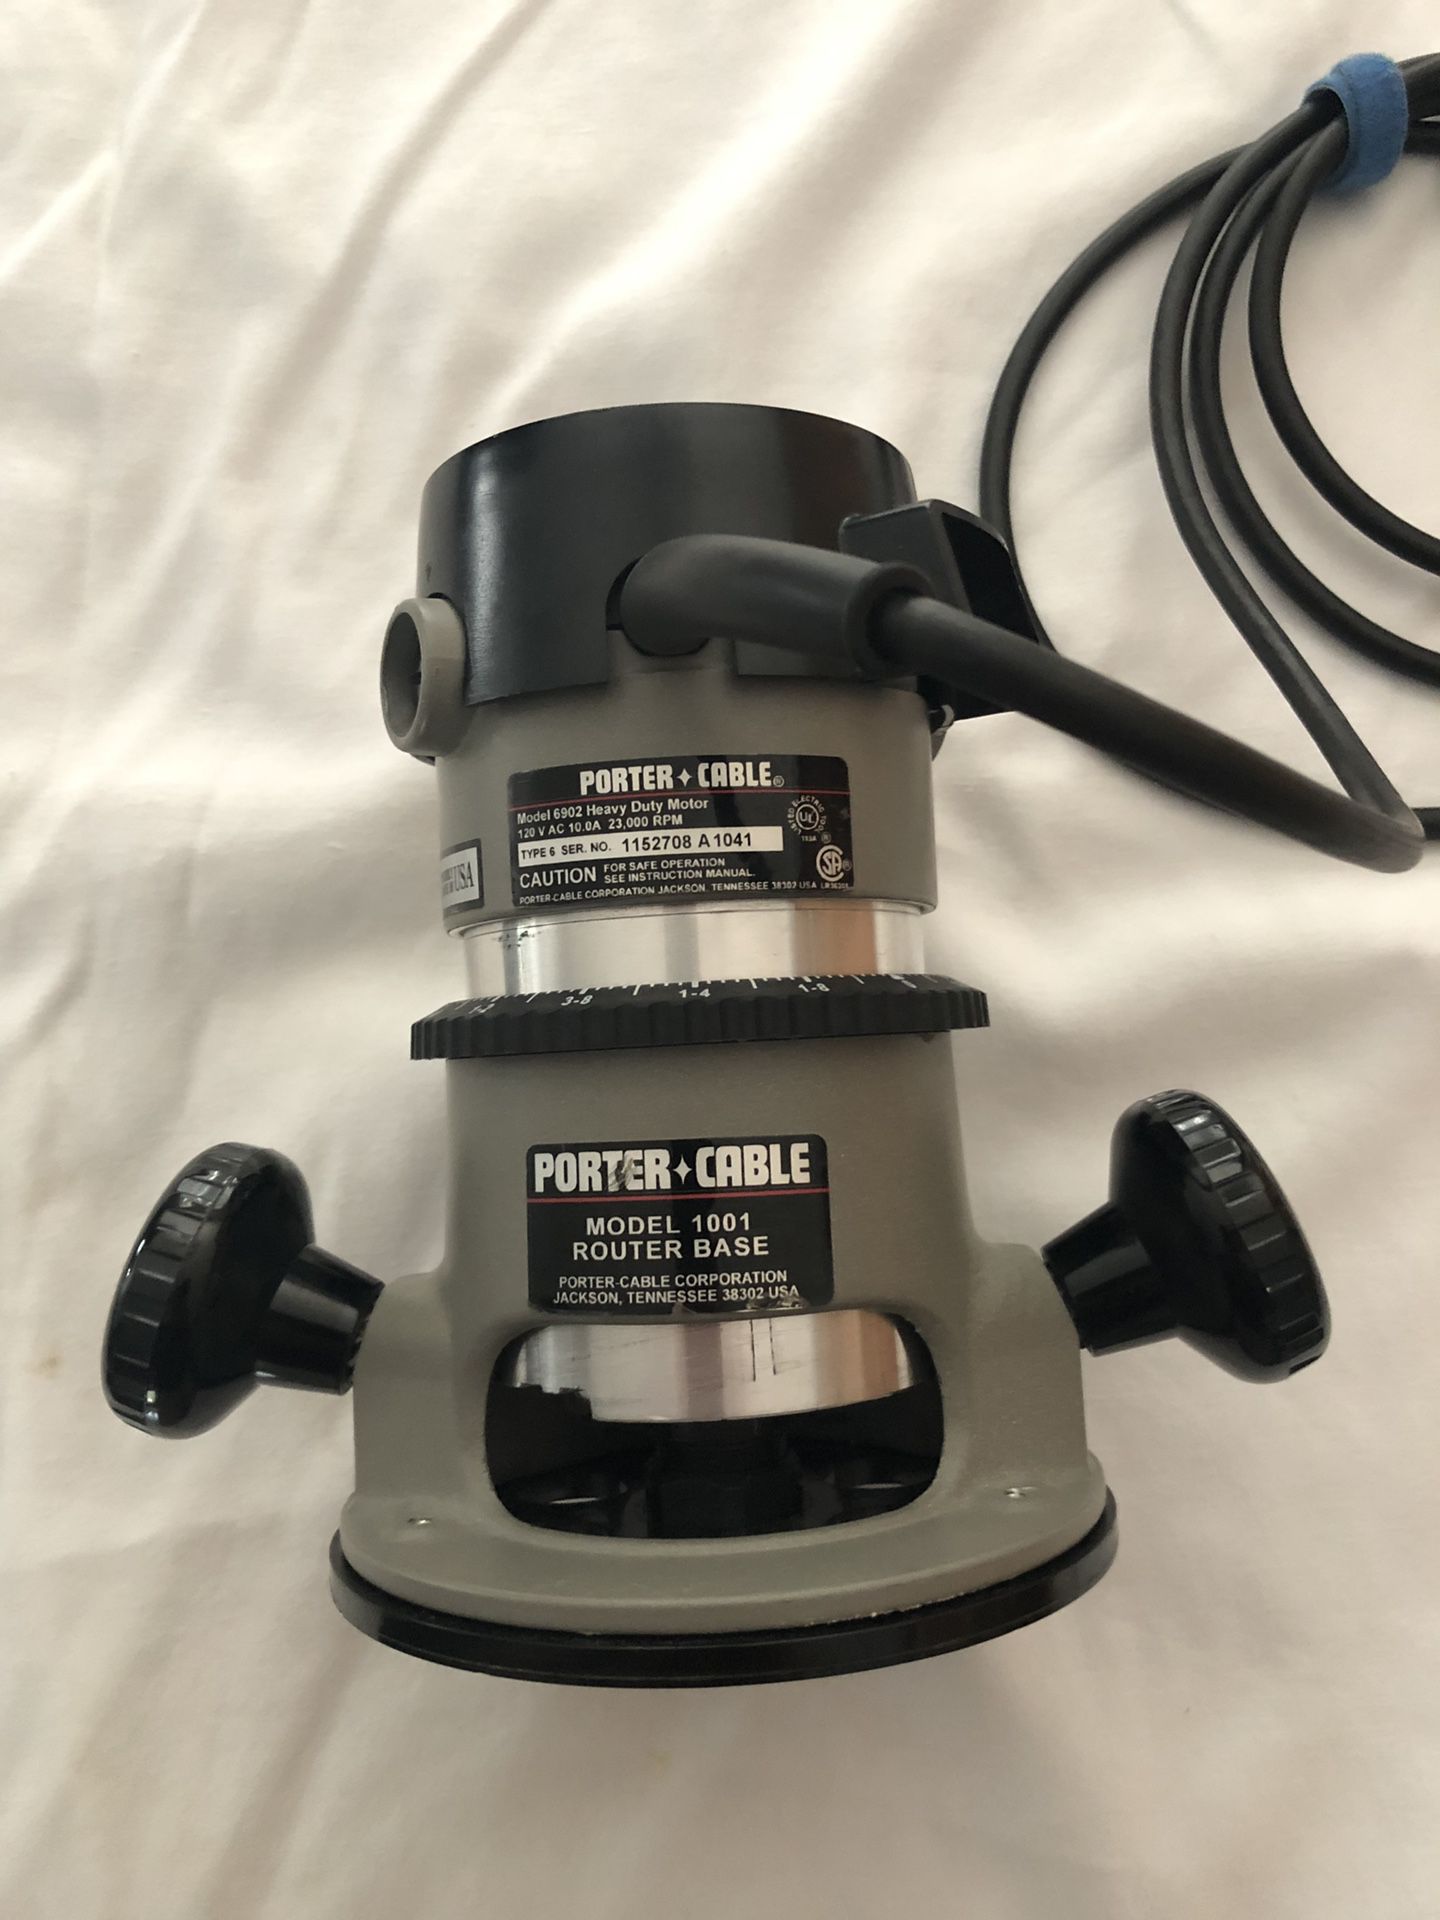 Porter Cable 690 Router with Plunge Base and Edge Guide